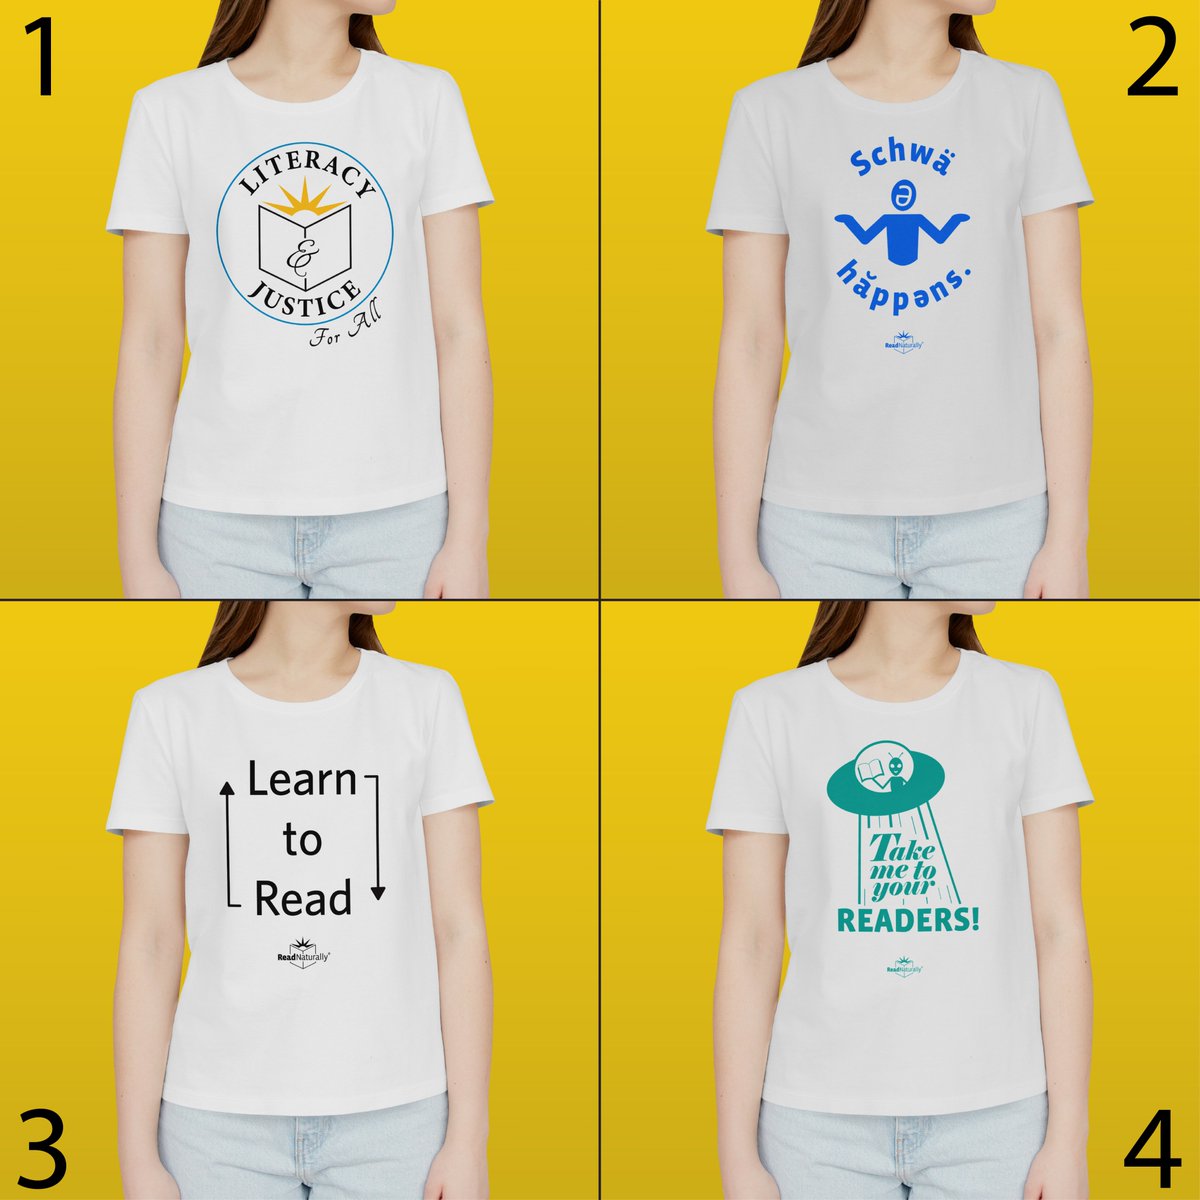 Which designs are your favorites? Poll in the comments⬇️

#literacy #readingteacher #readinginterventionist #literacycoach #linguistics #linguisticsnerd #scienceofreading #tshirts #structuredliteracy #edtech #funnytshirts